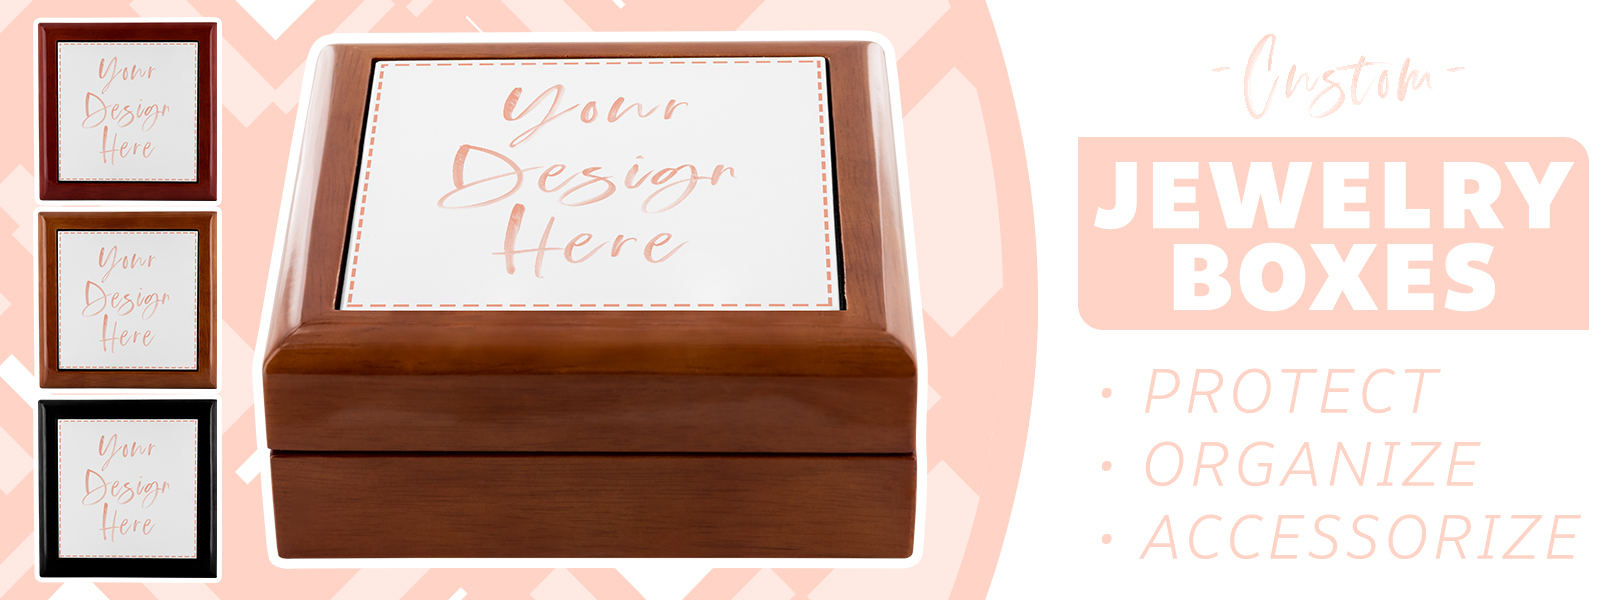 Jewelry Boxes: Because You Can’t Wear It All